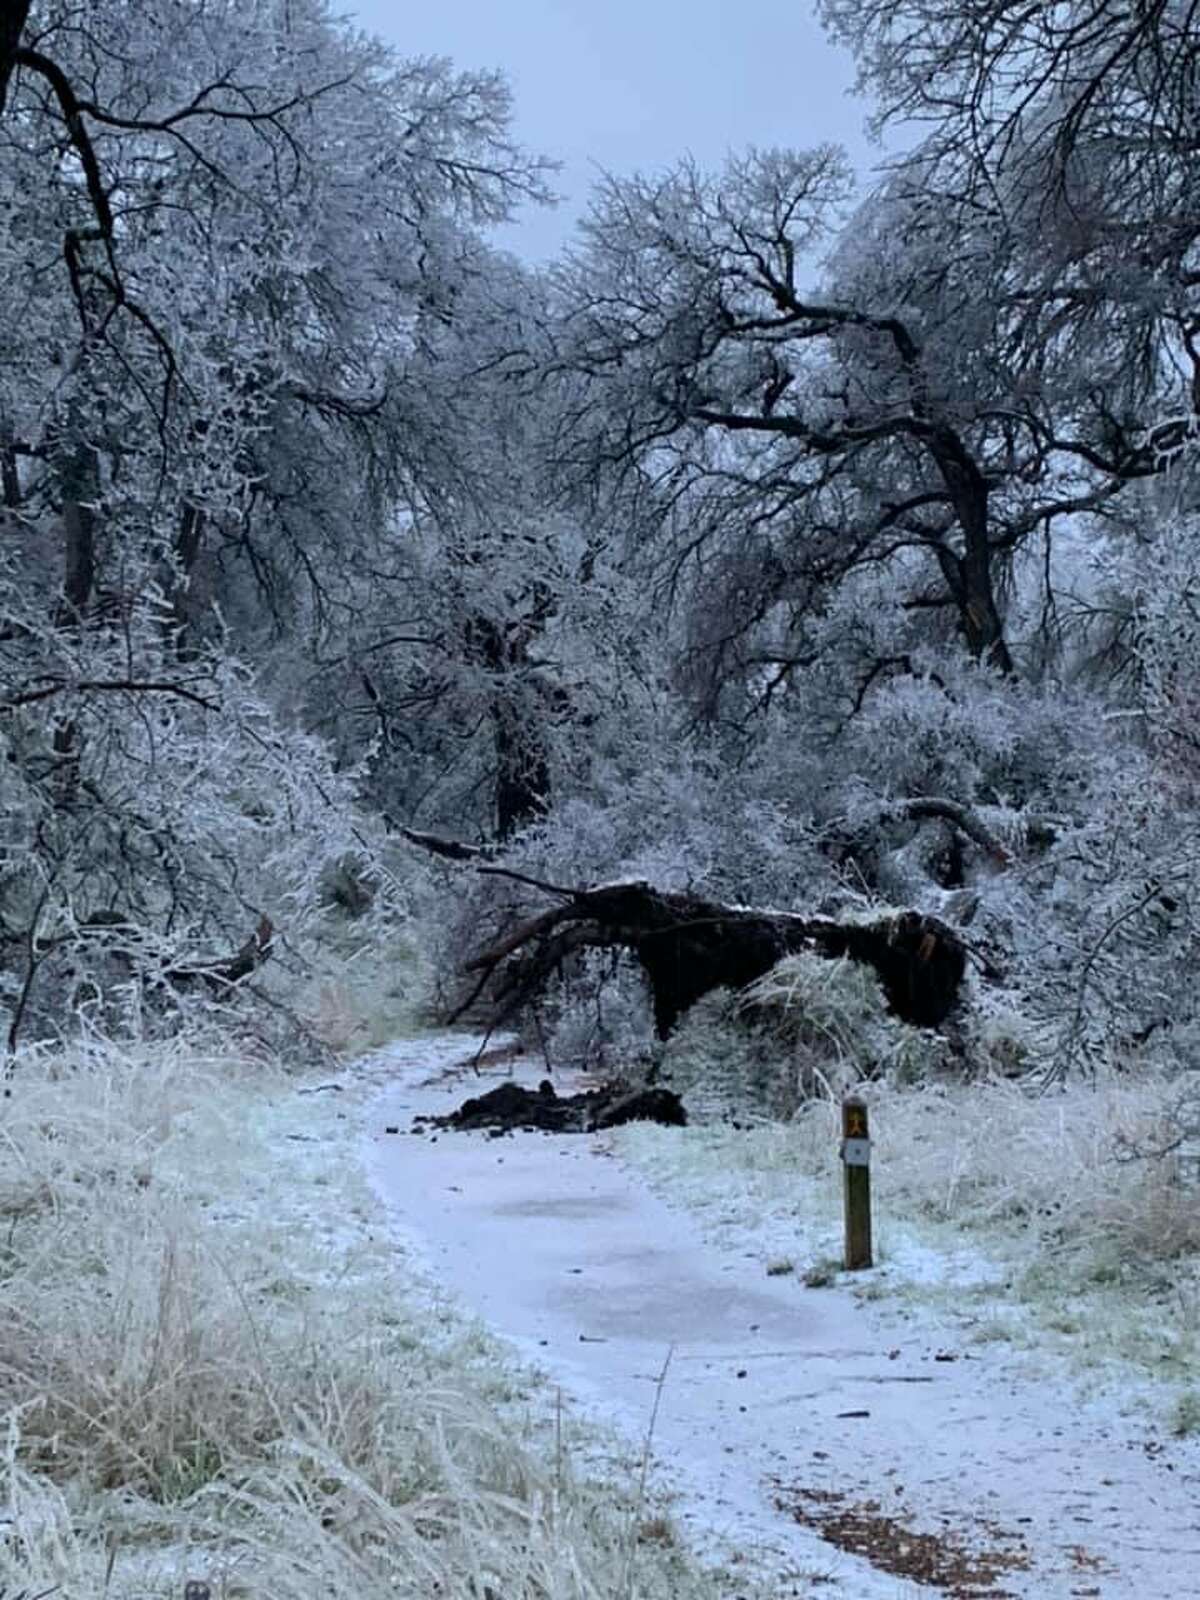 On Friday, Enchanted Rock announced it will be closed for the day on its Facebook account, writing the ice accumulations have made conditions in the park hazardous for visitors.